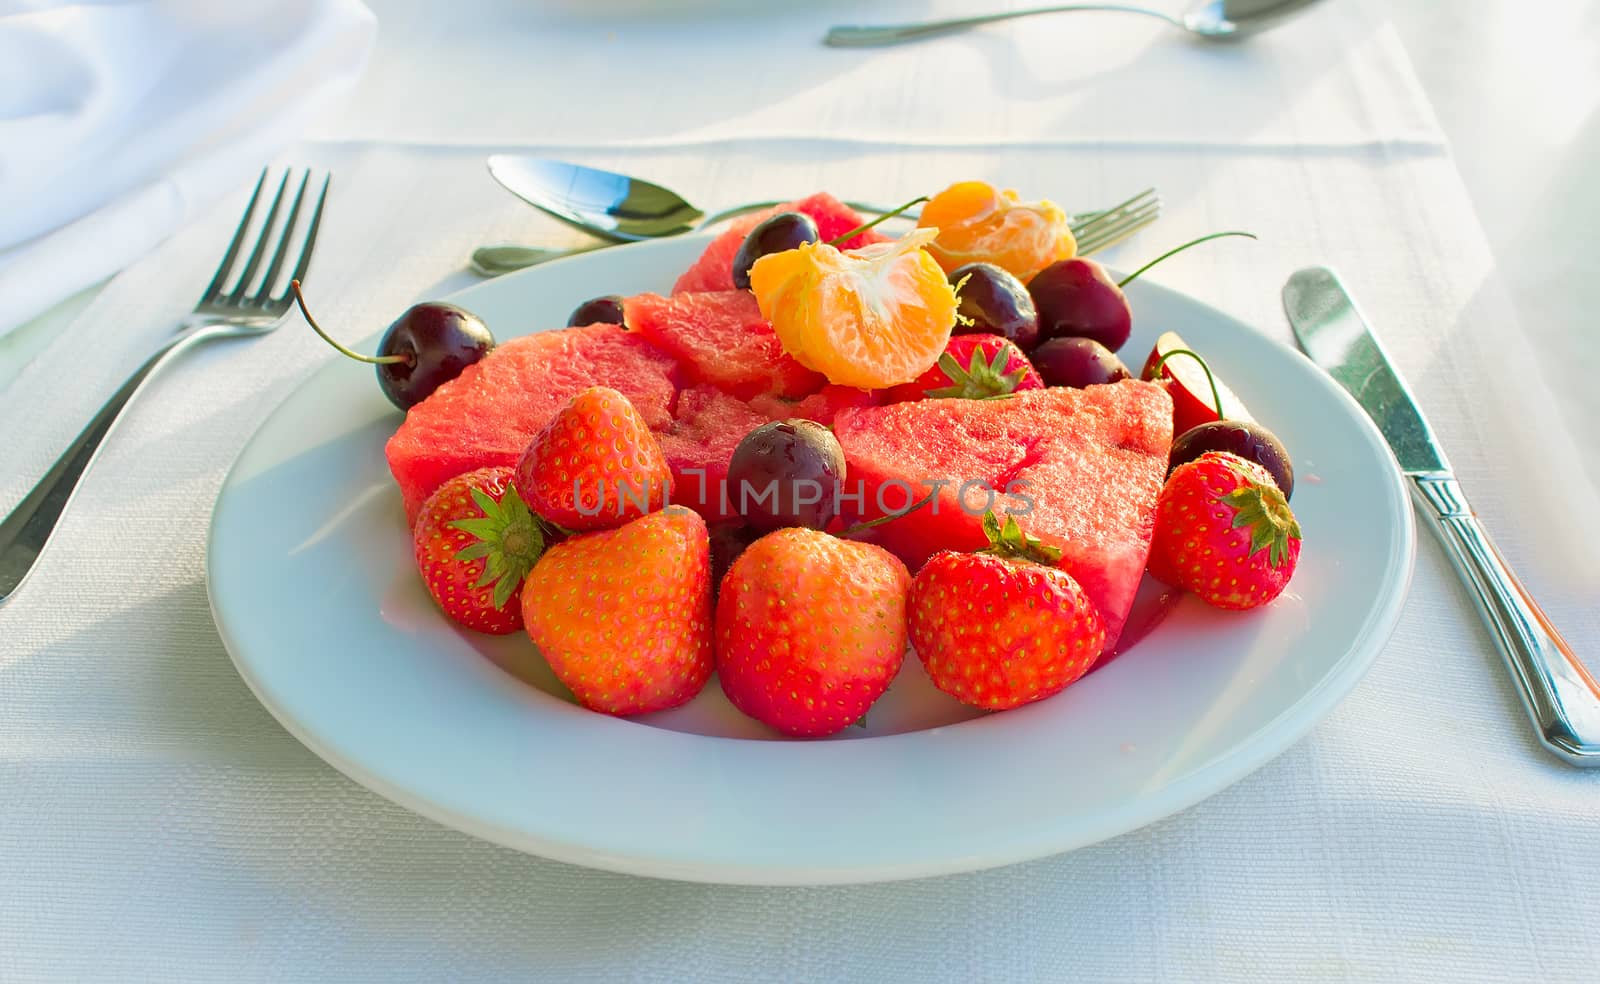 Strawberries, cherries, slices of watermelon, slices of Mandarin are located on a plate on a white tablecloth table.